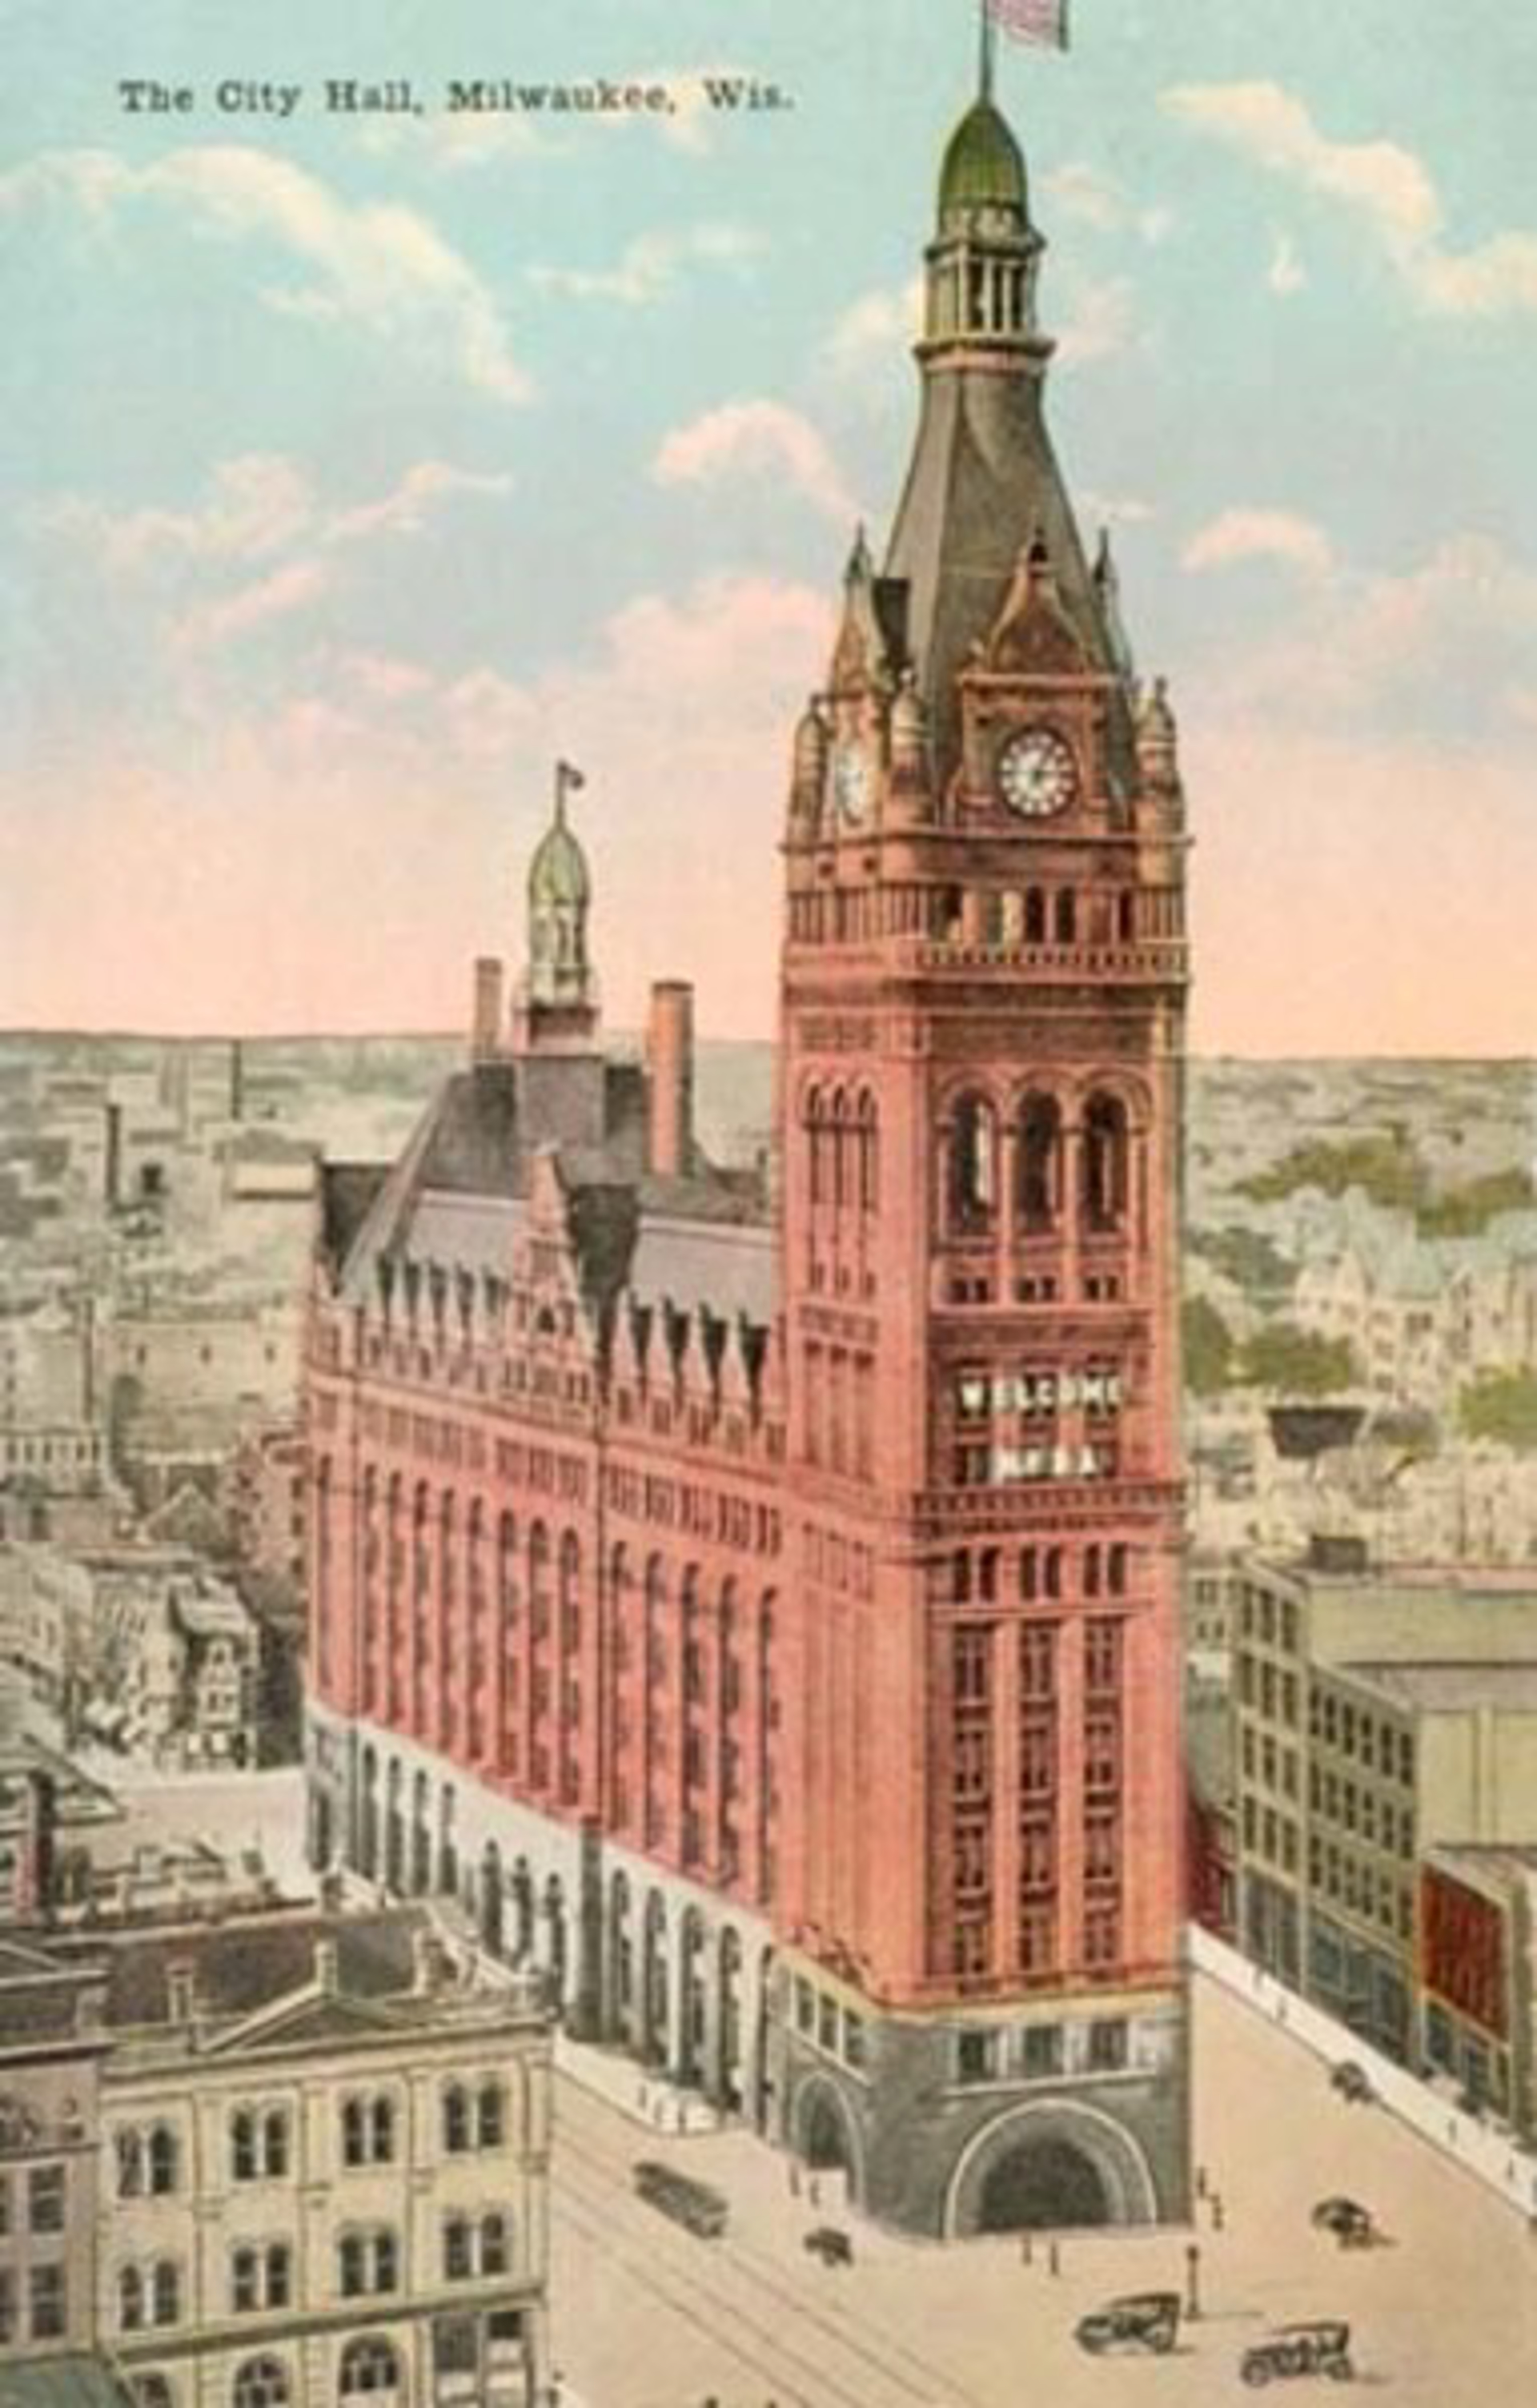 The City Hall, Milwaukee, Wis. by Unknown